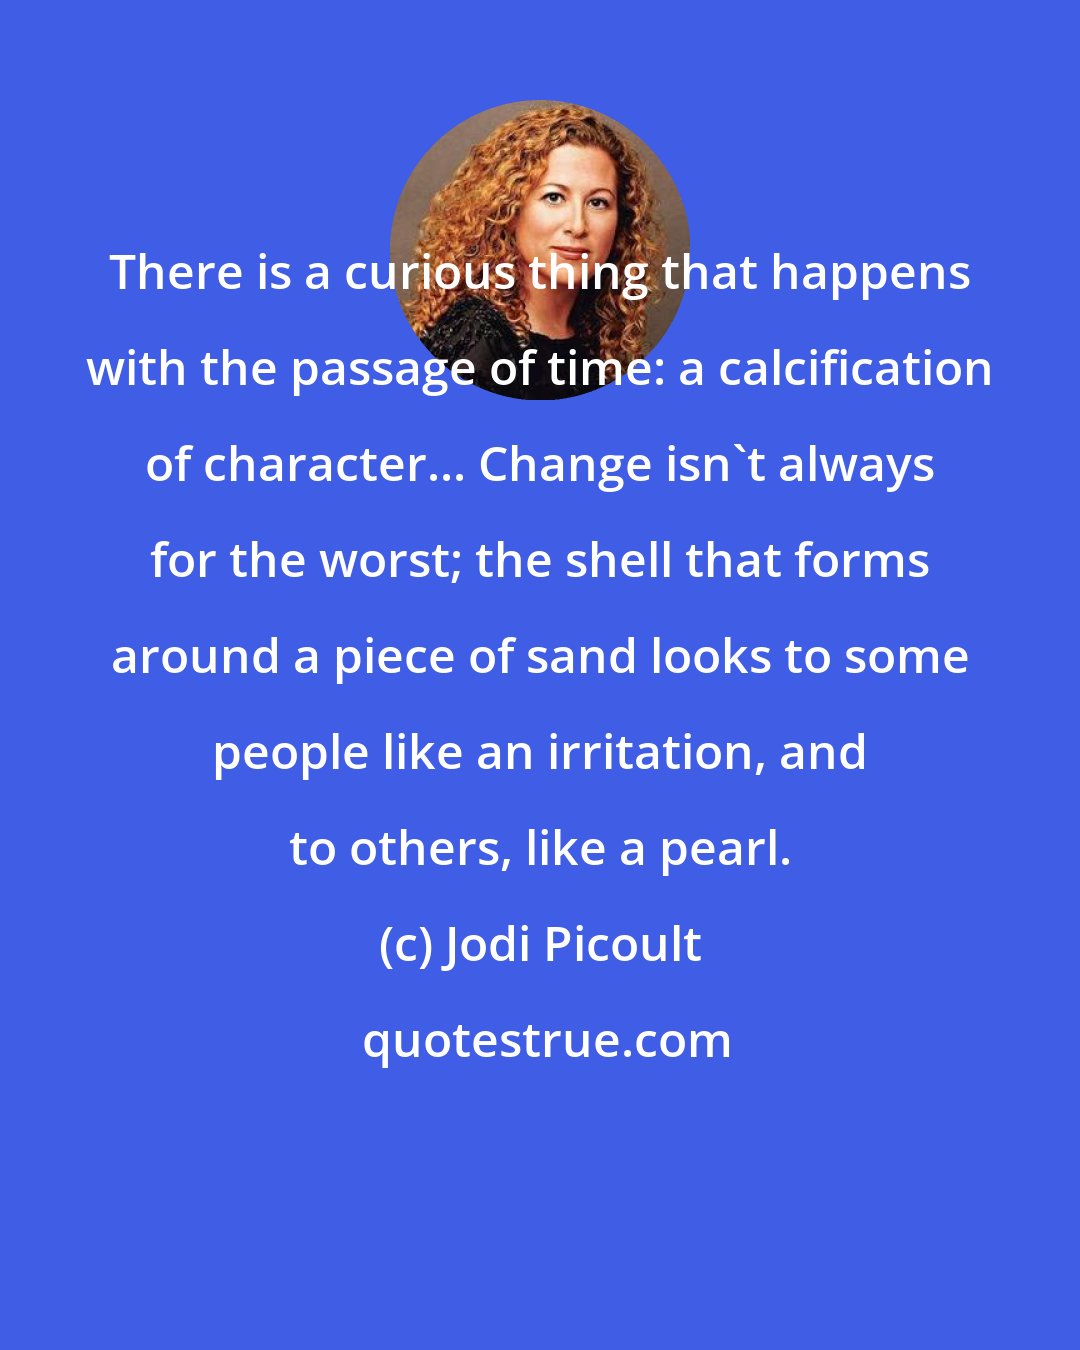 Jodi Picoult: There is a curious thing that happens with the passage of time: a calcification of character... Change isn't always for the worst; the shell that forms around a piece of sand looks to some people like an irritation, and to others, like a pearl.